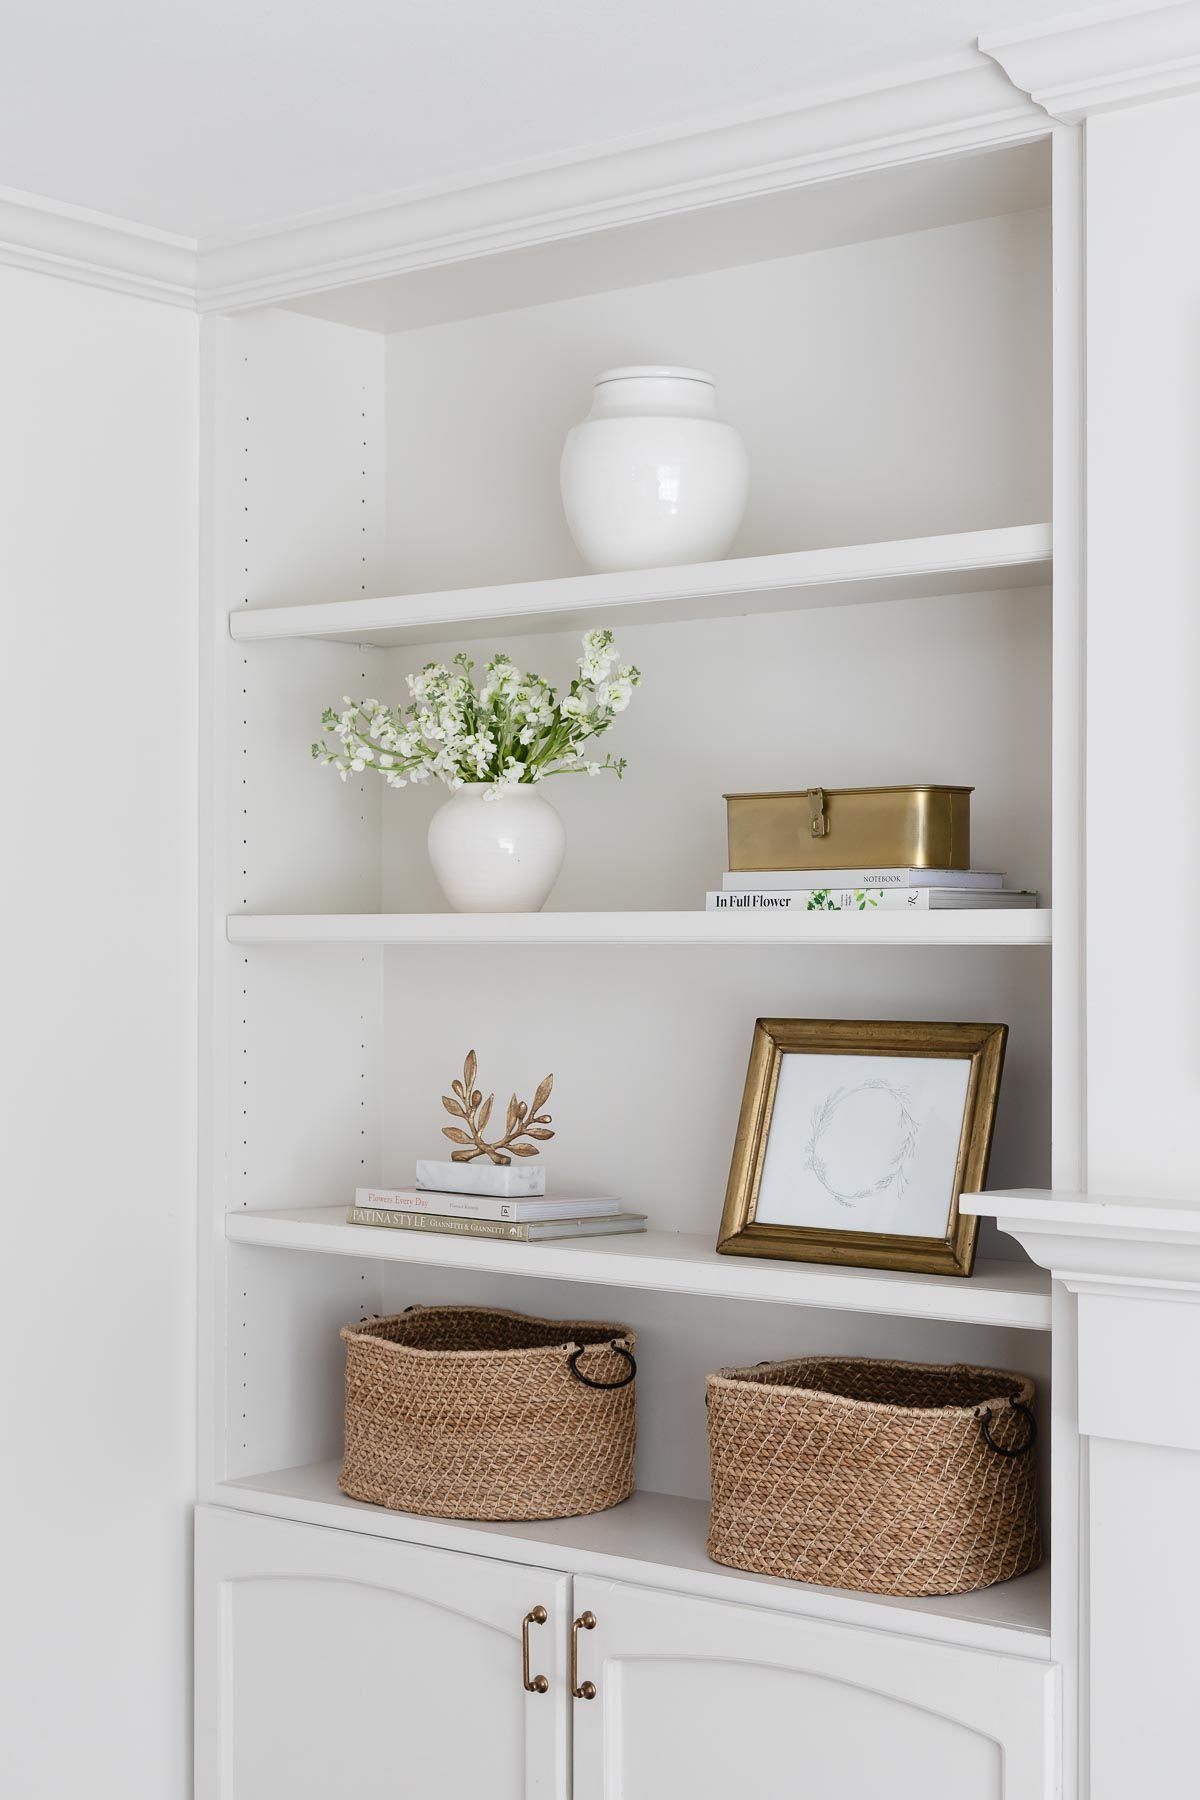 Built in bookshelves styled with neutral decor and home accessories.